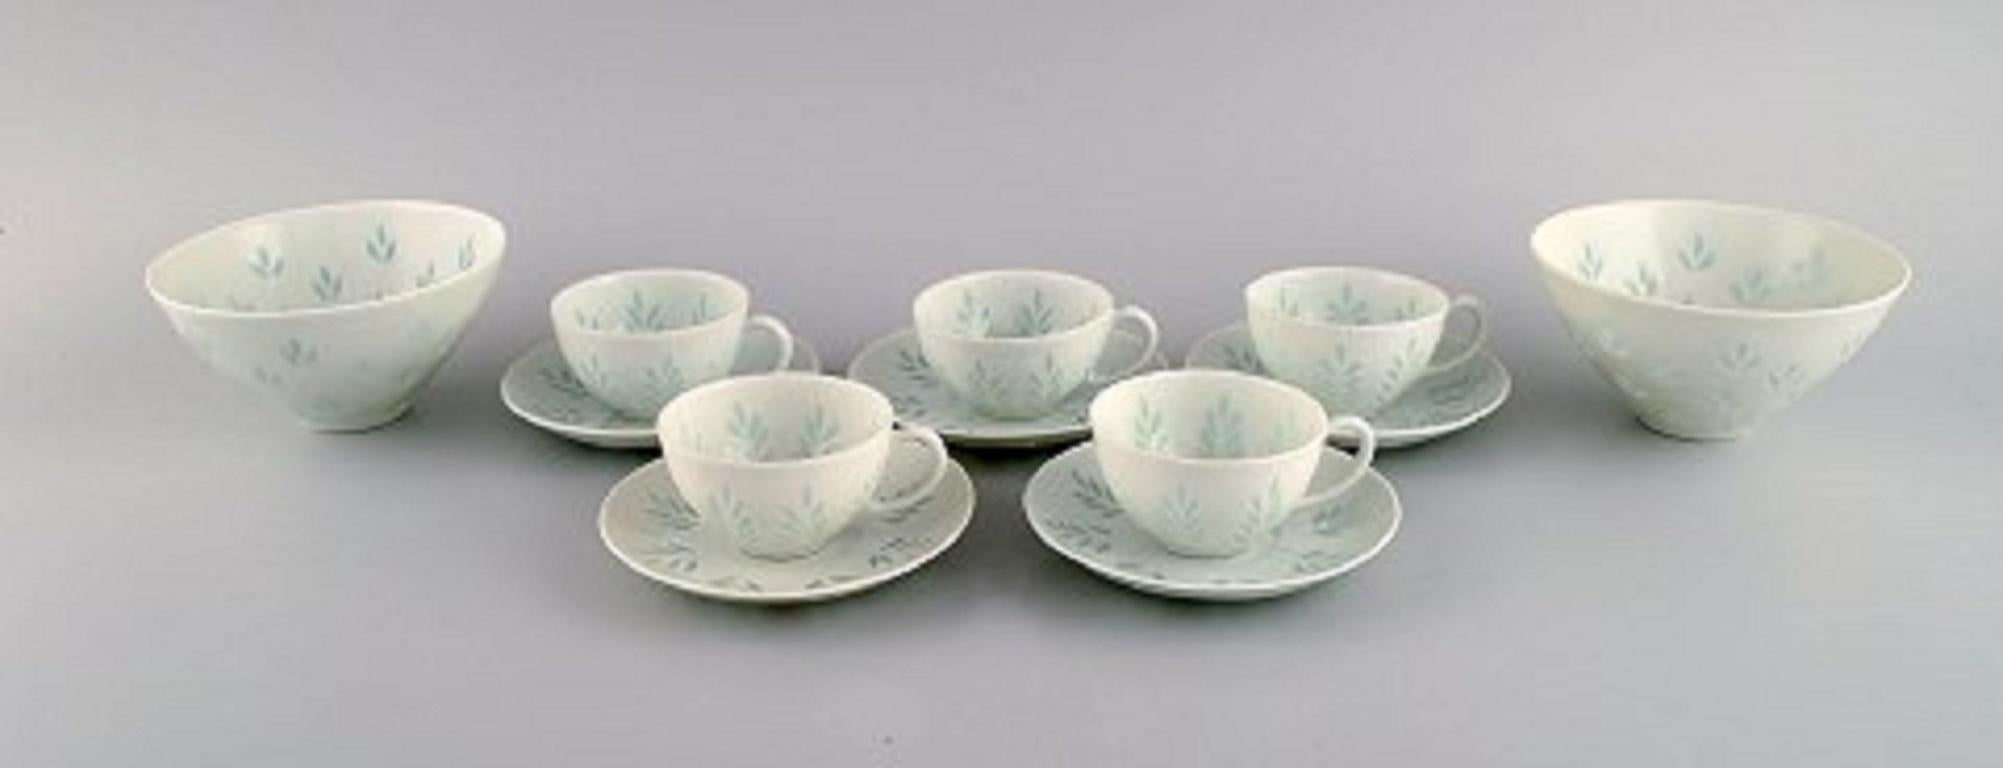 Freidl Holzer Kjellberg for Arabia. Five coffee cups with saucers and two bowls in rice porcelain. Mid-20th century.
The cup measures: 6.8 x 4 cm.
Saucer diameter: 11 cm.
The bowl measures: 12 x 6 cm.
In excellent condition.
Stamped.